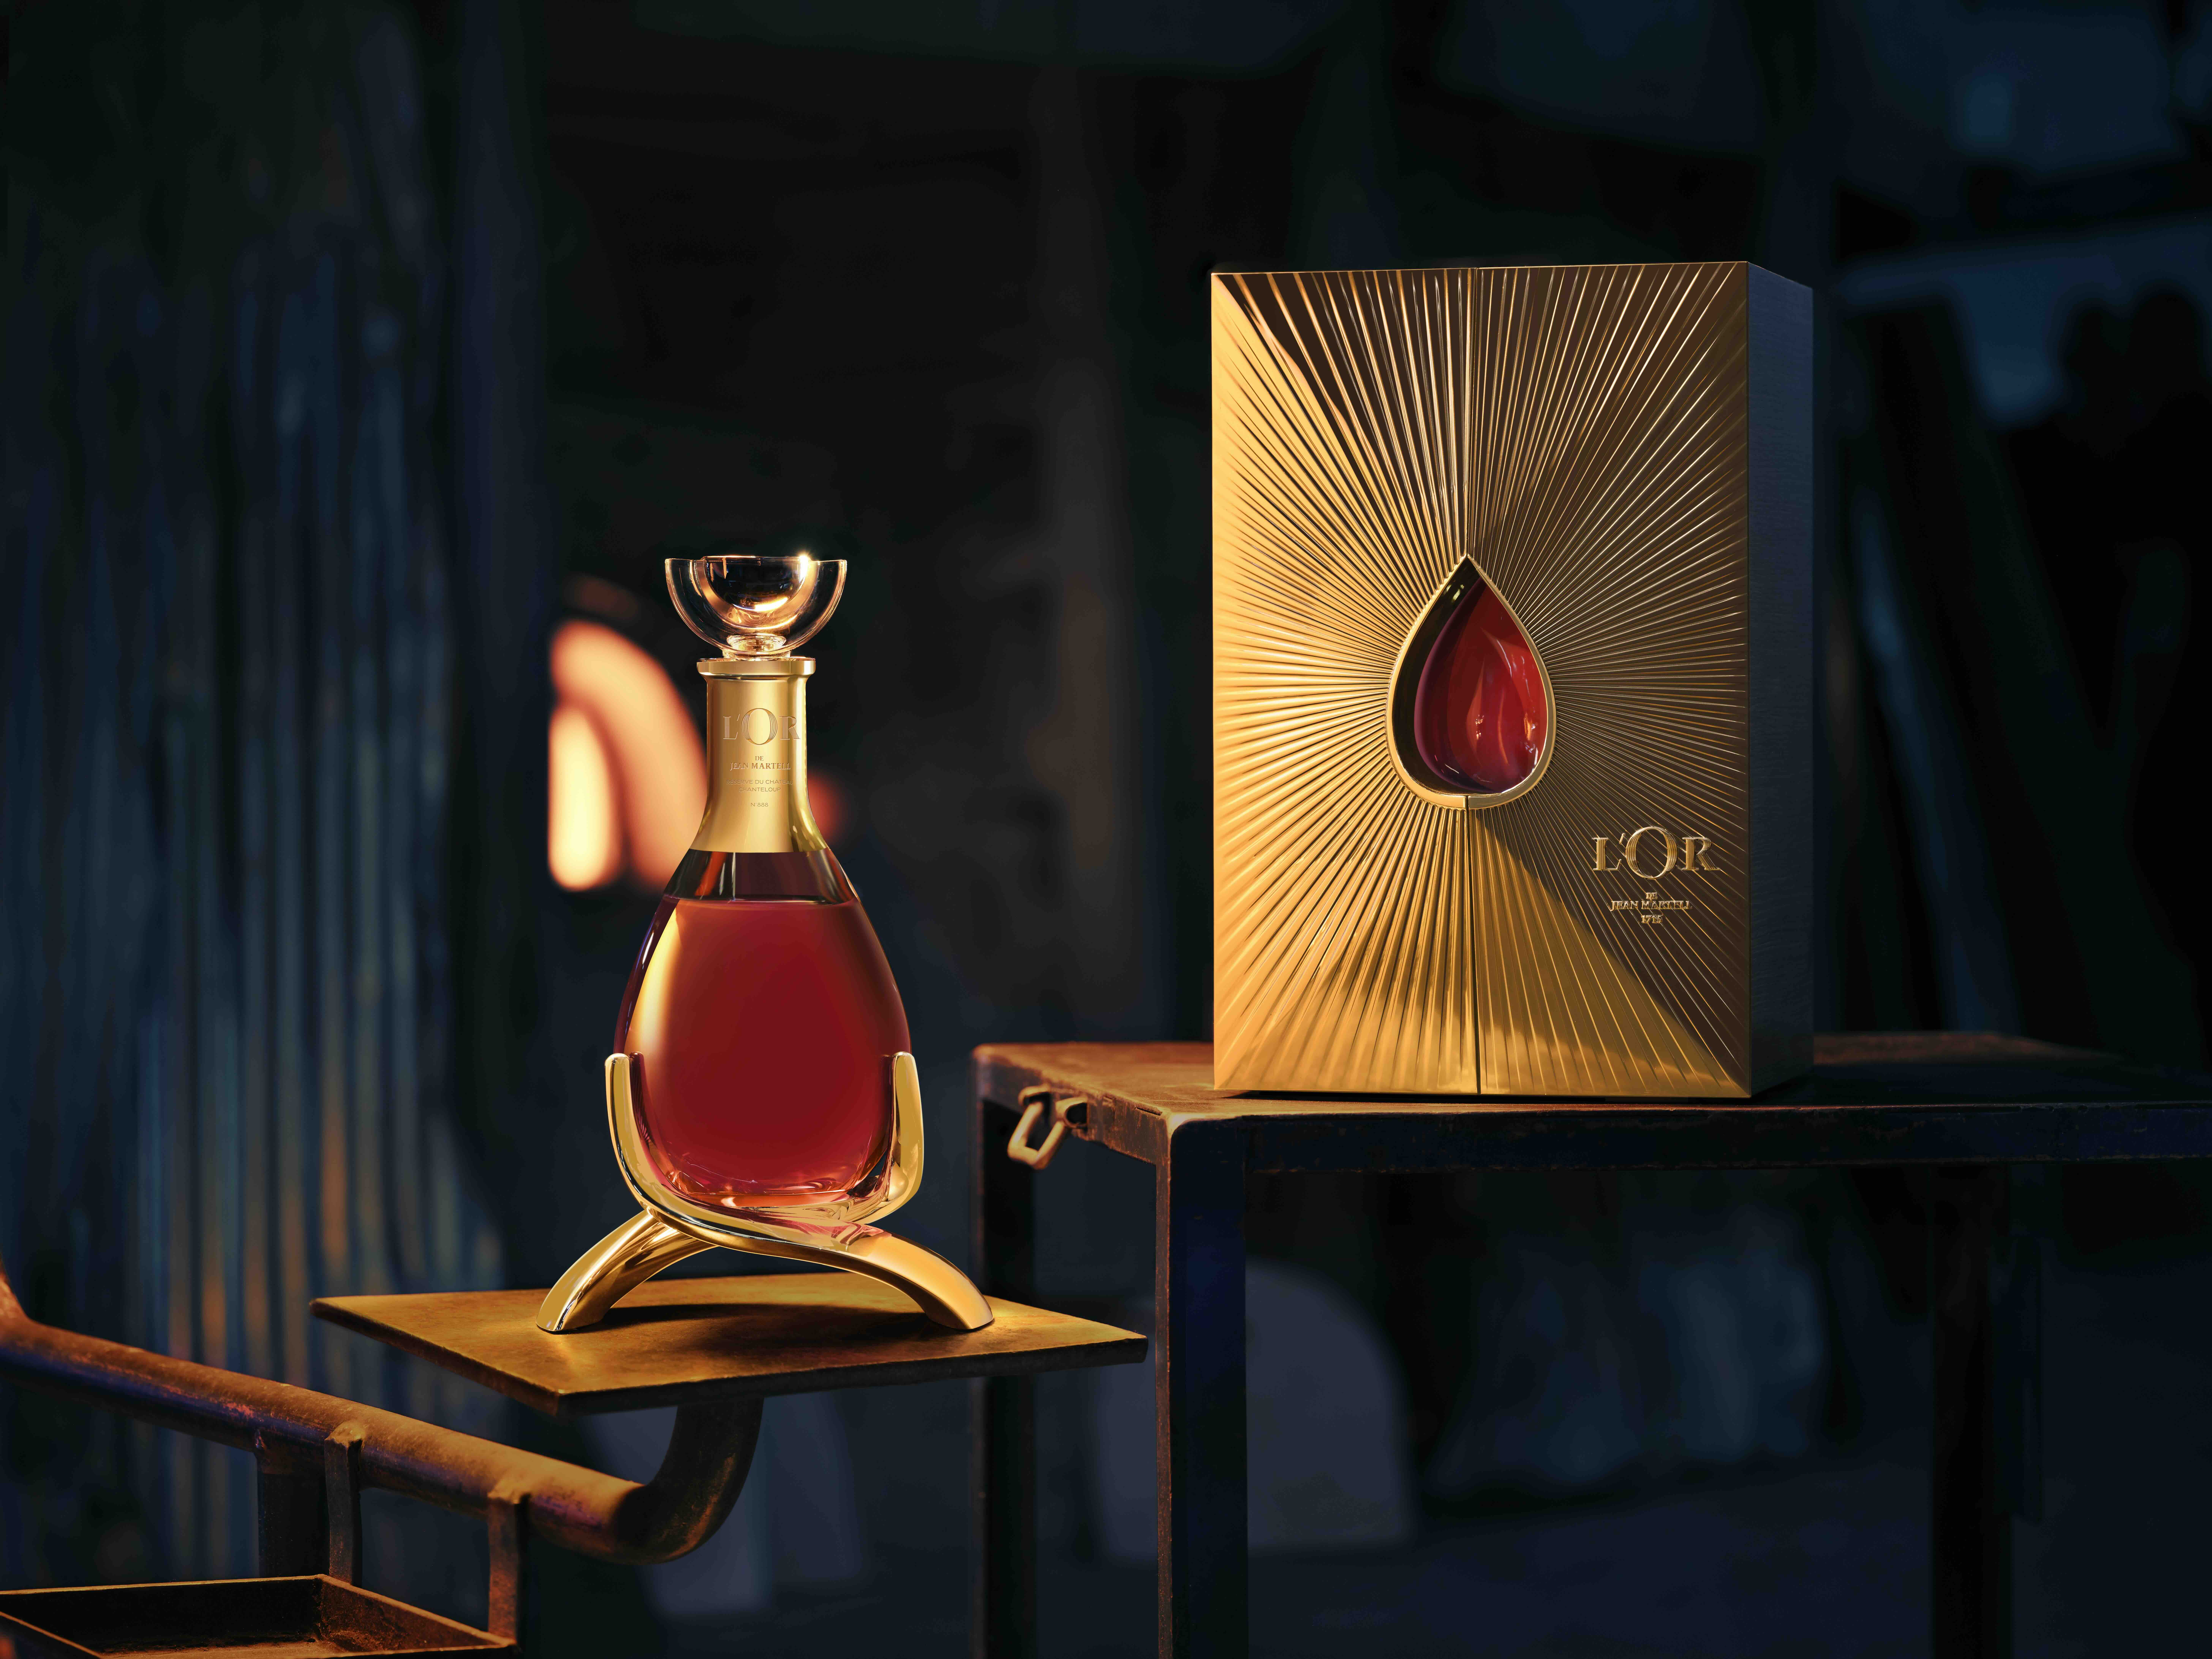 Martell Honours Its History While Looking Ahead With the L’or De Jean Martell – Réserve Du Château